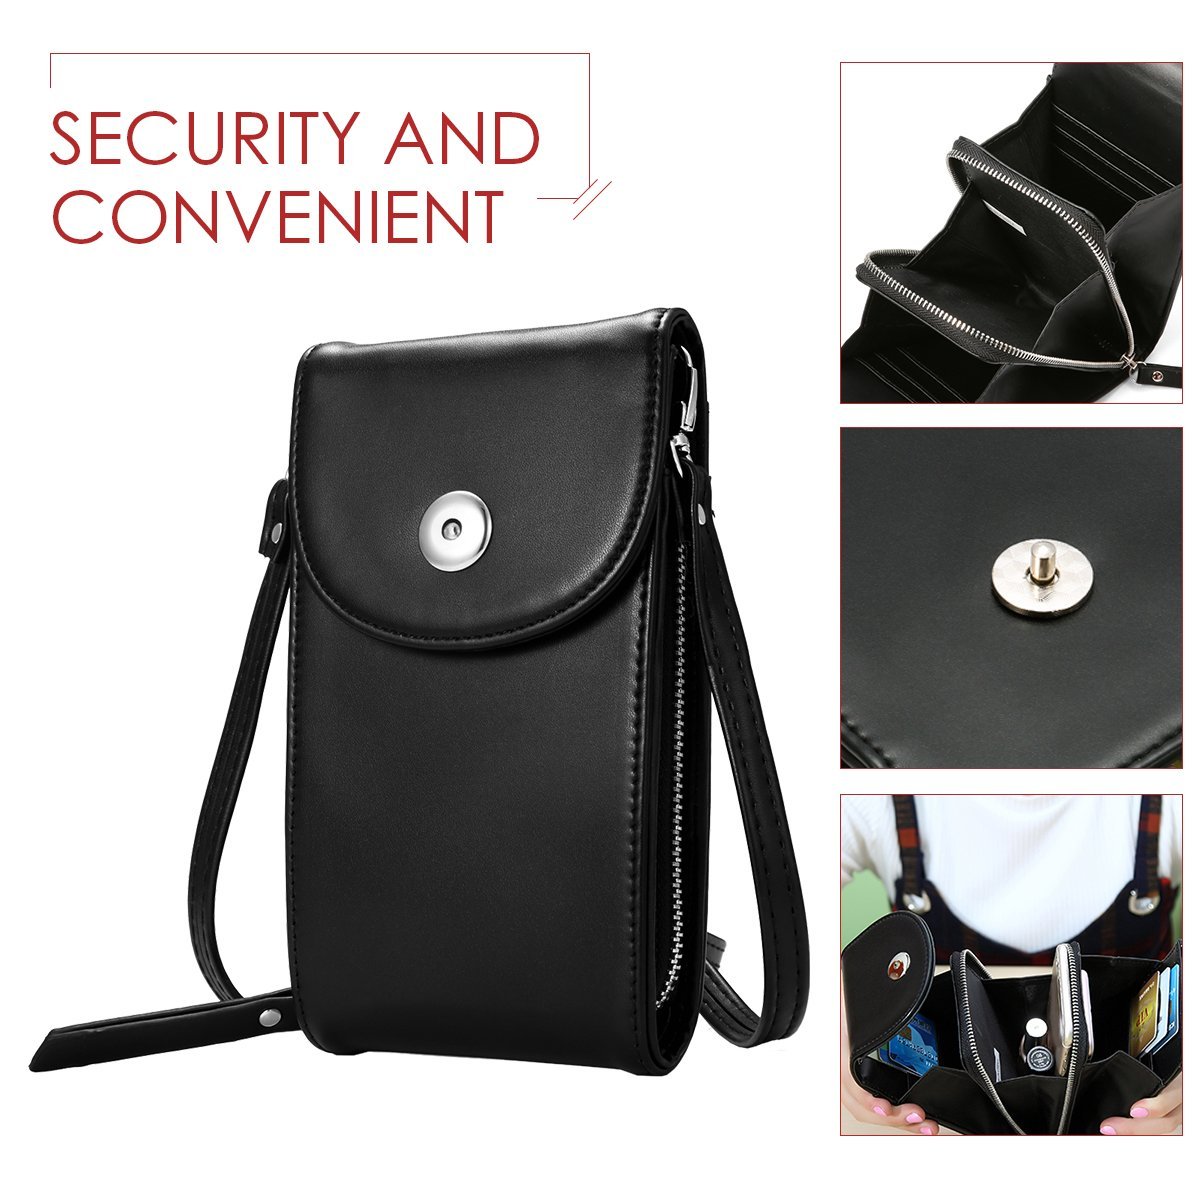 Multifunctional-Three-layer-Waist-Bag-Phone-Bag-For-47-55-Inch-Smart-Phone-for-iPhone-X-Xiaomi-Non-o-1633377-7